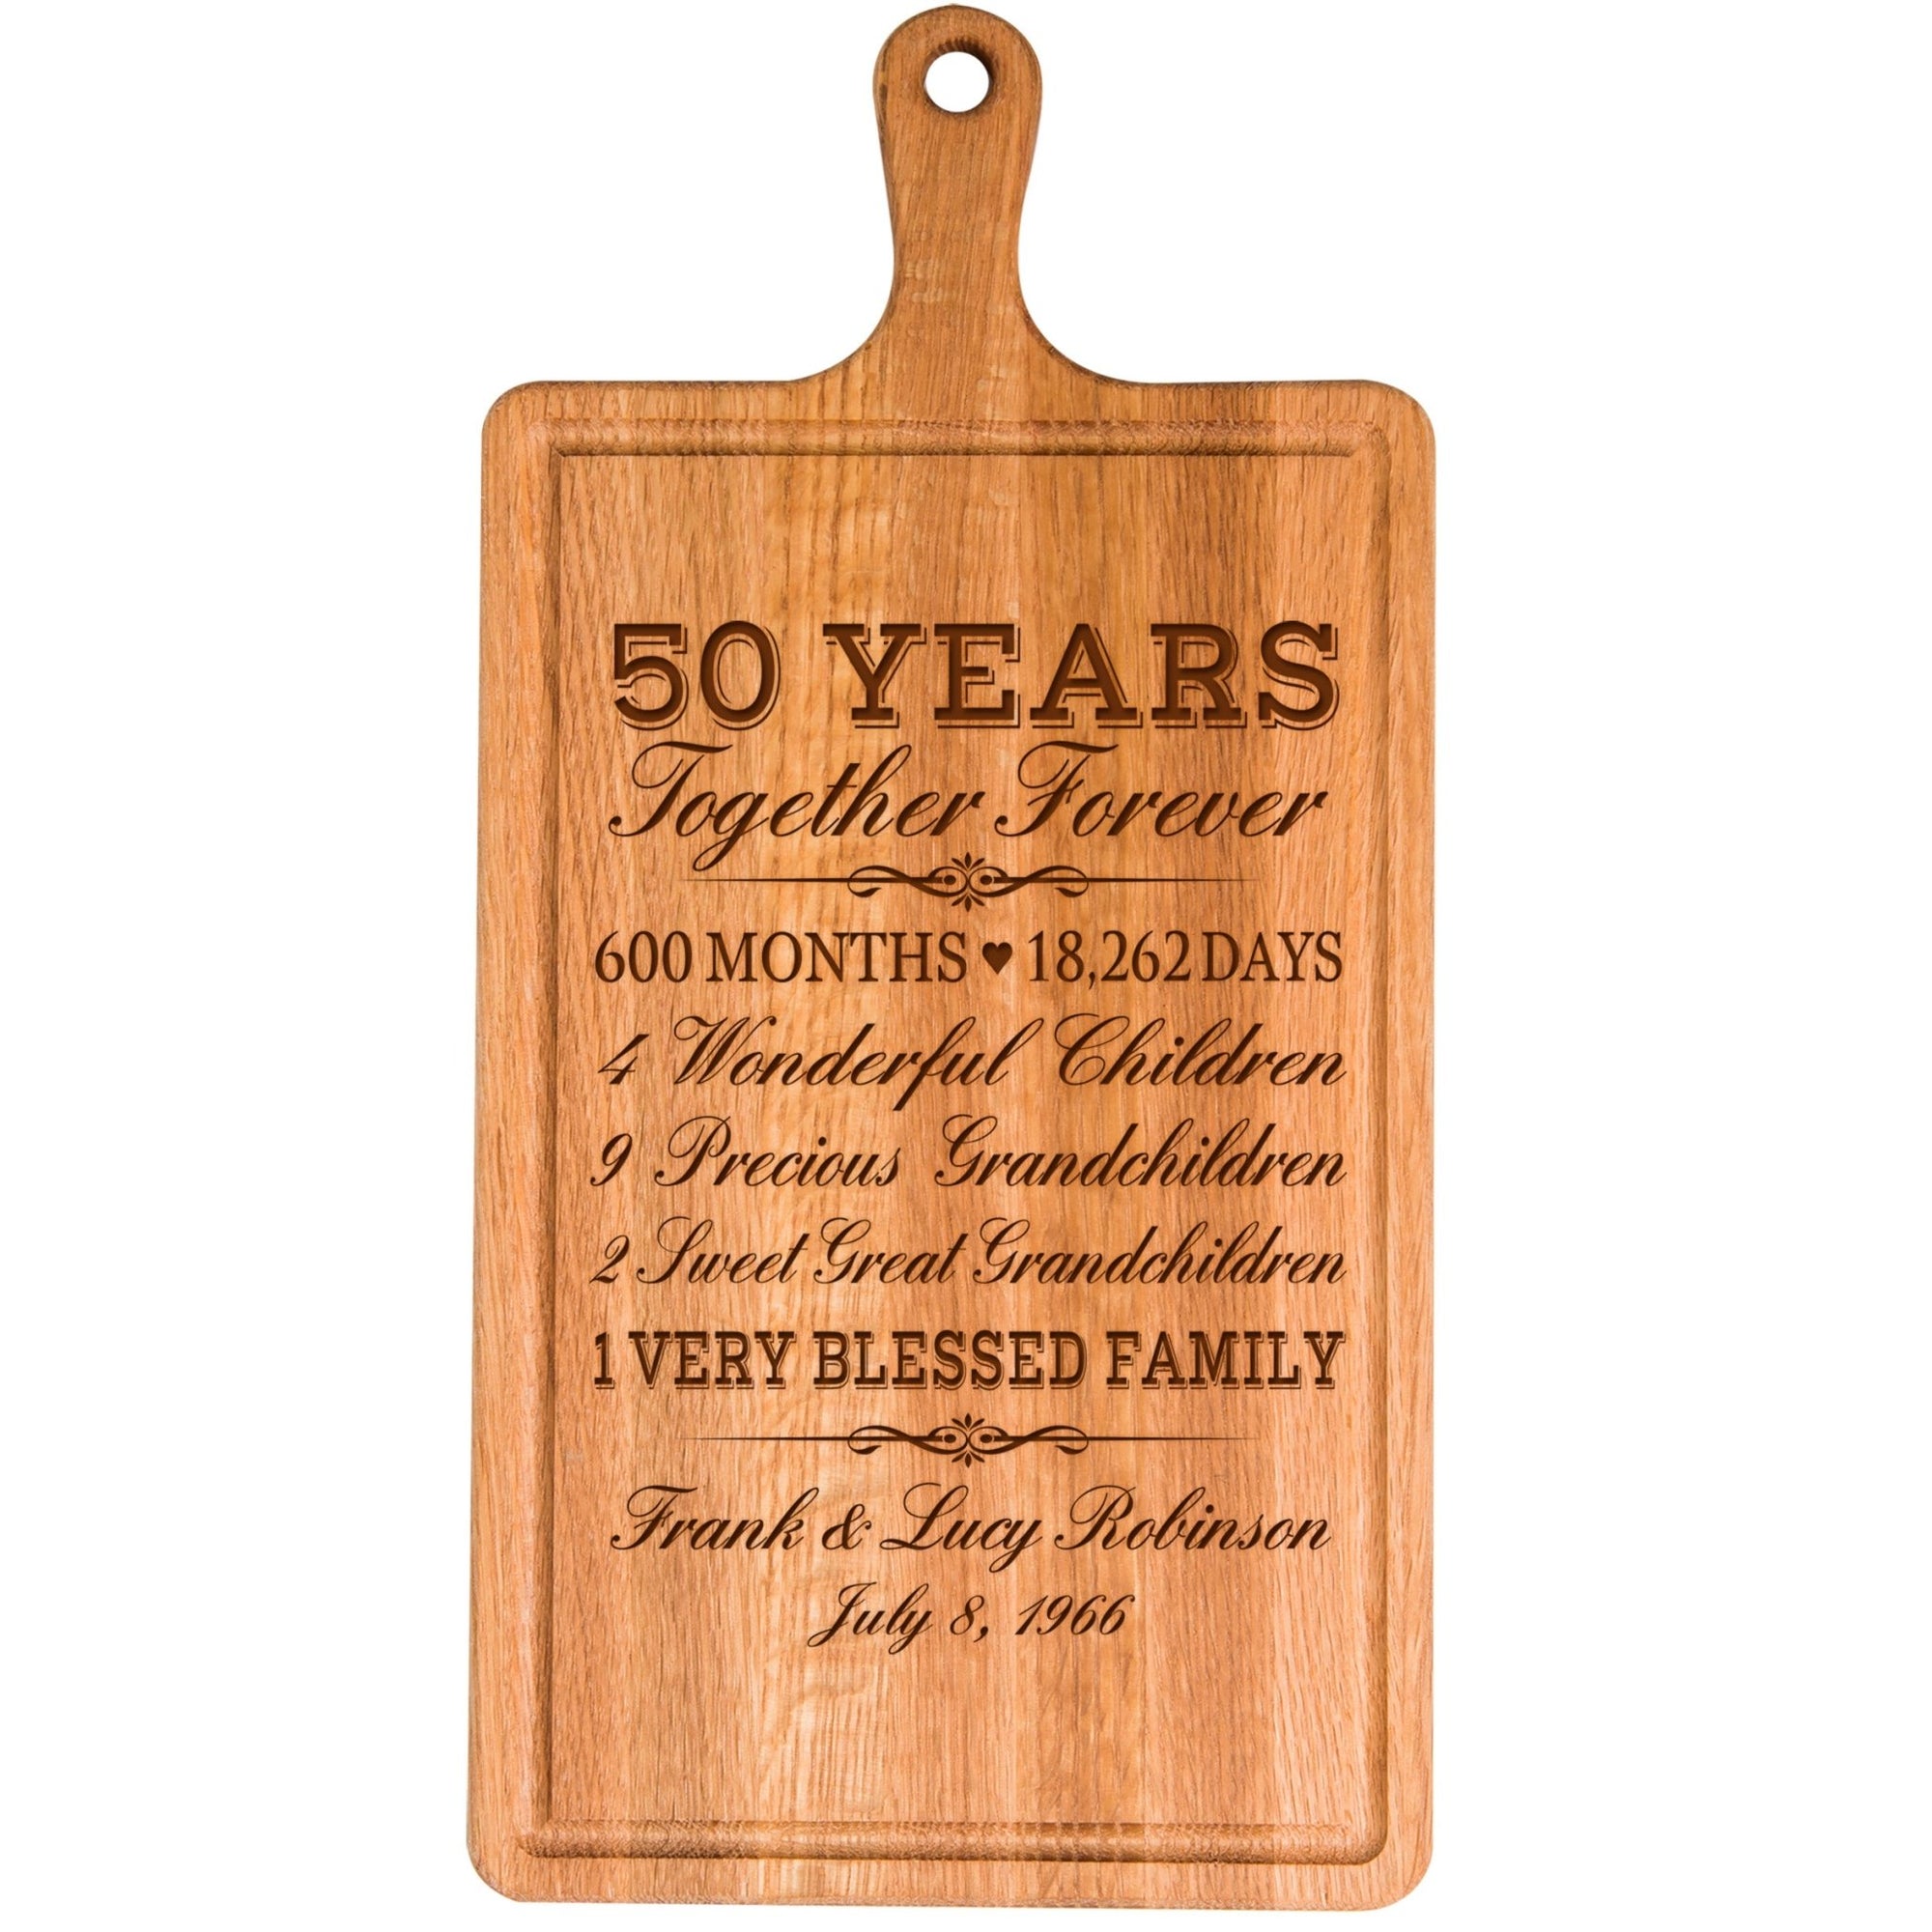 Personalized Anniversary Cutting Board - Years Months Weeks Days Hours Minutes Seconds - LifeSong Milestones